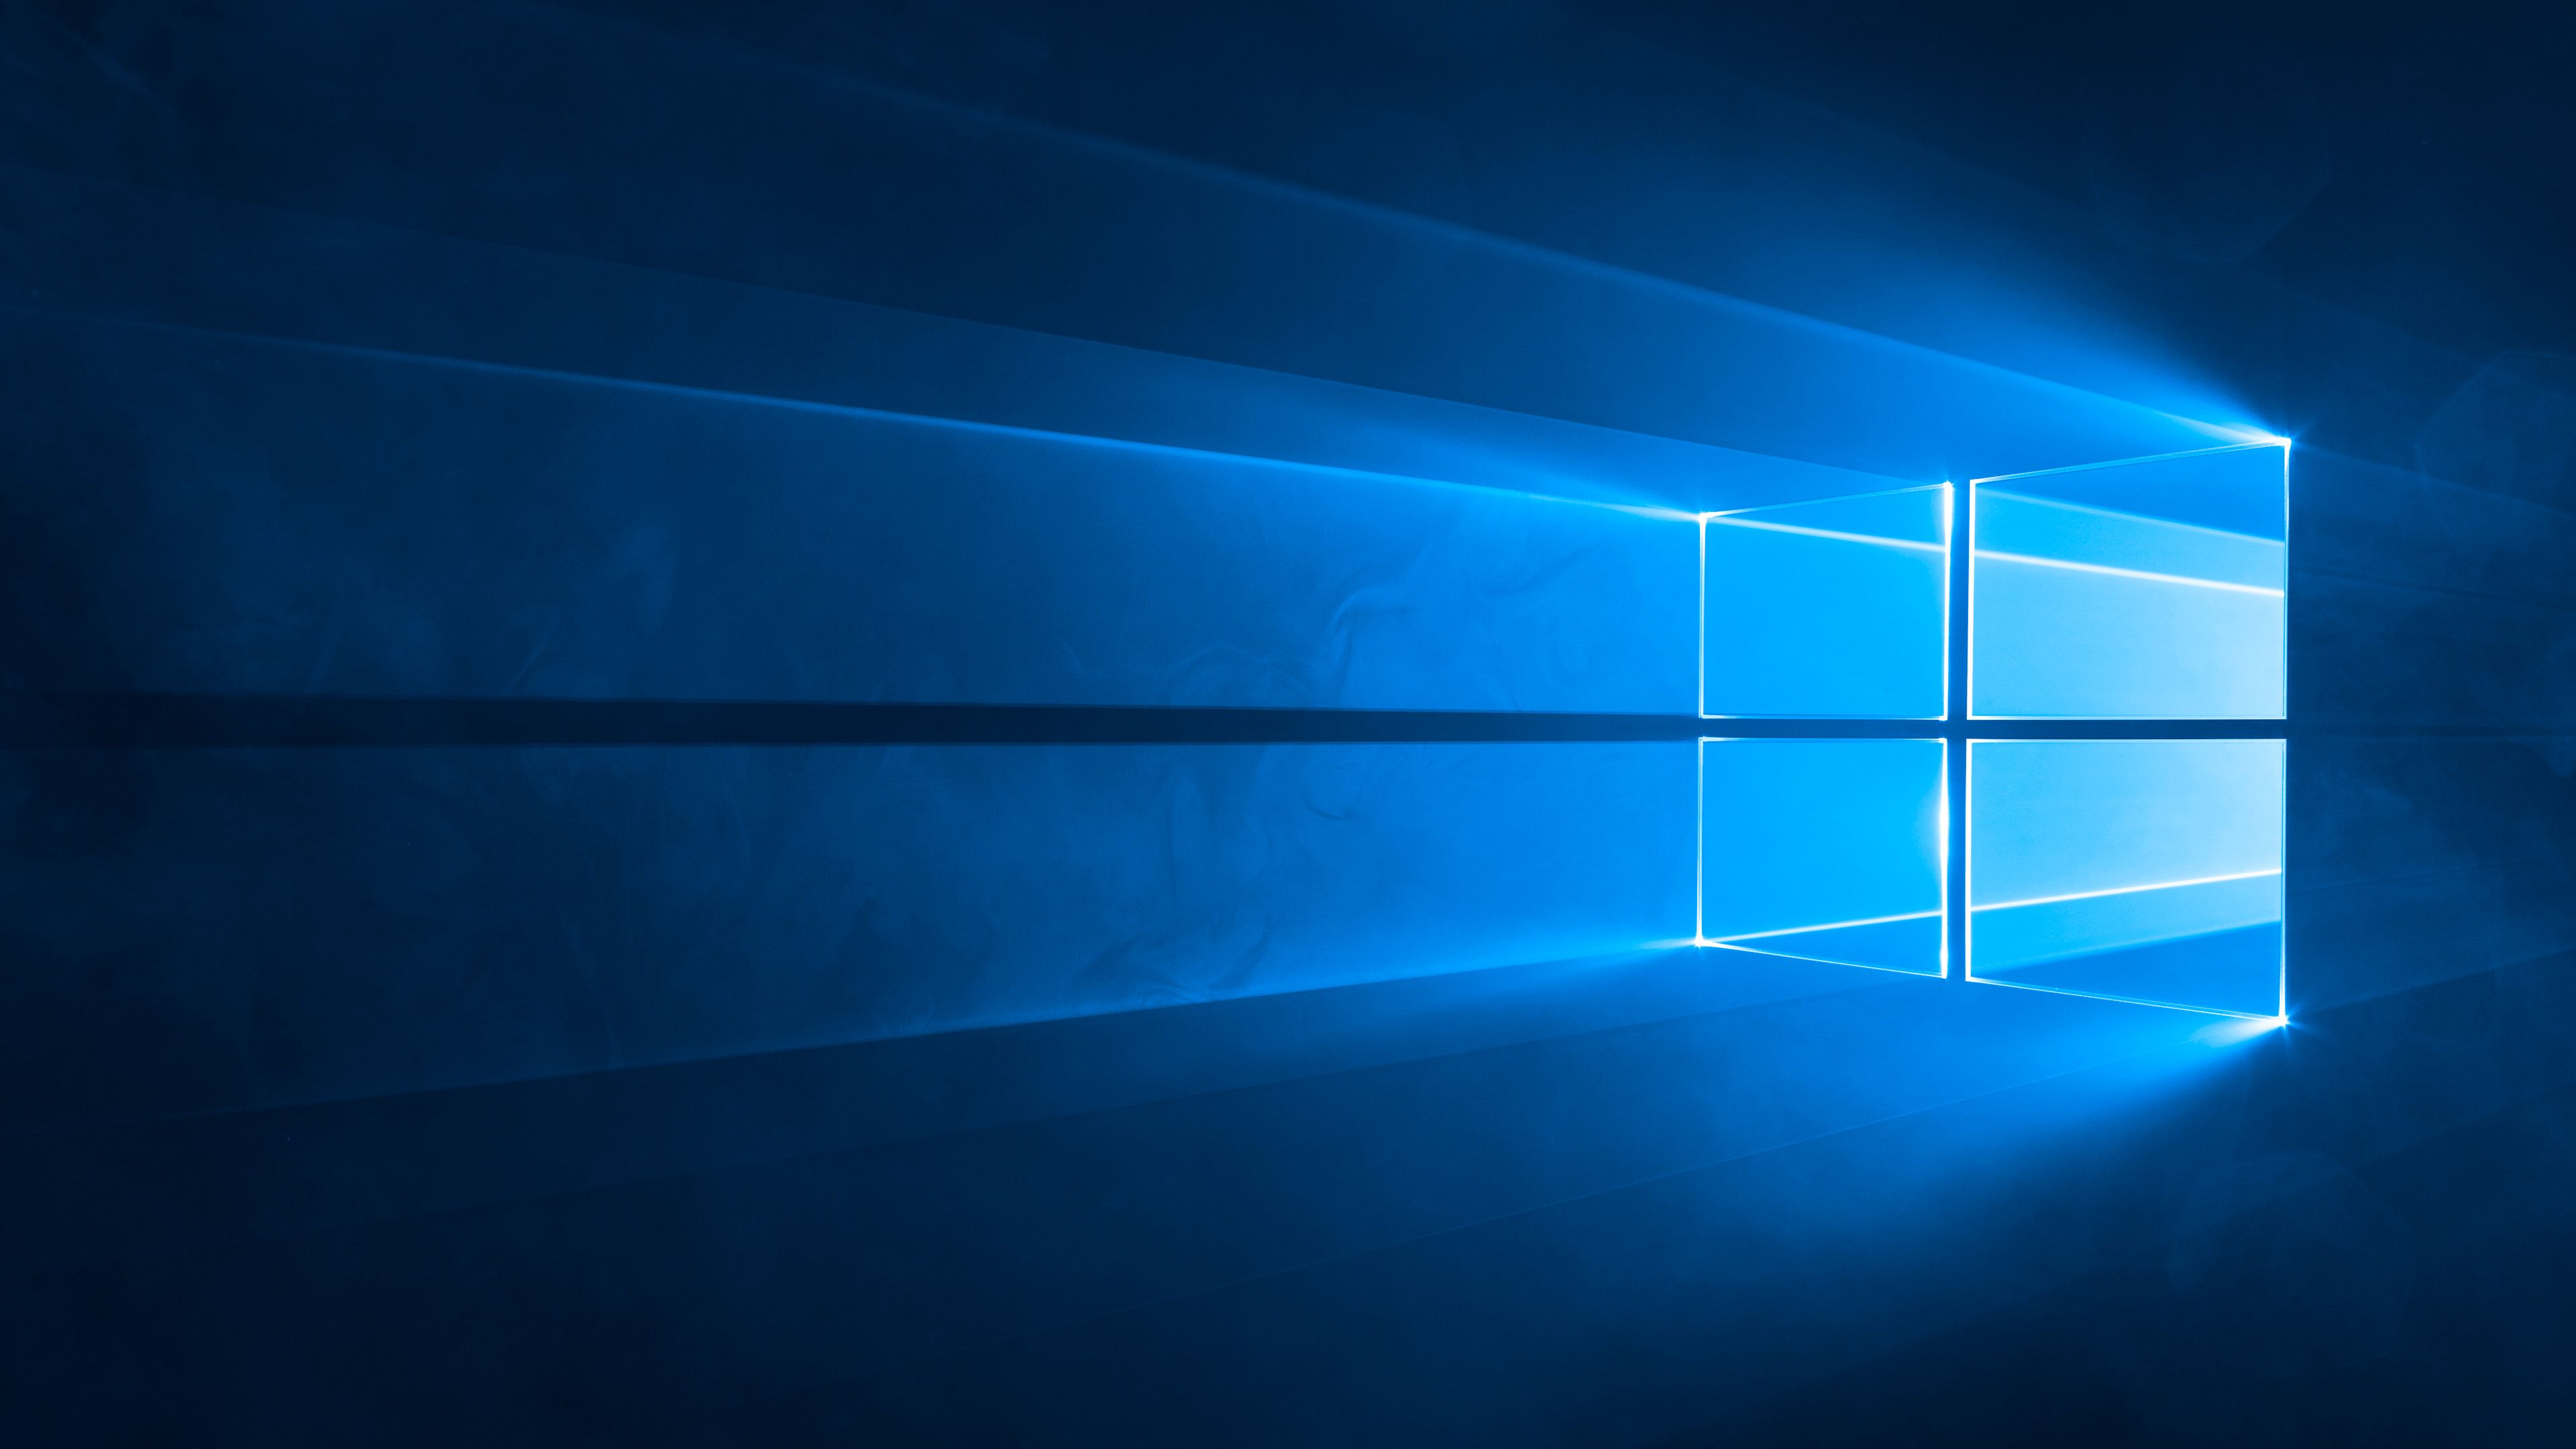 Microsoft will continue supporting Windows 10 with yearly feature updates